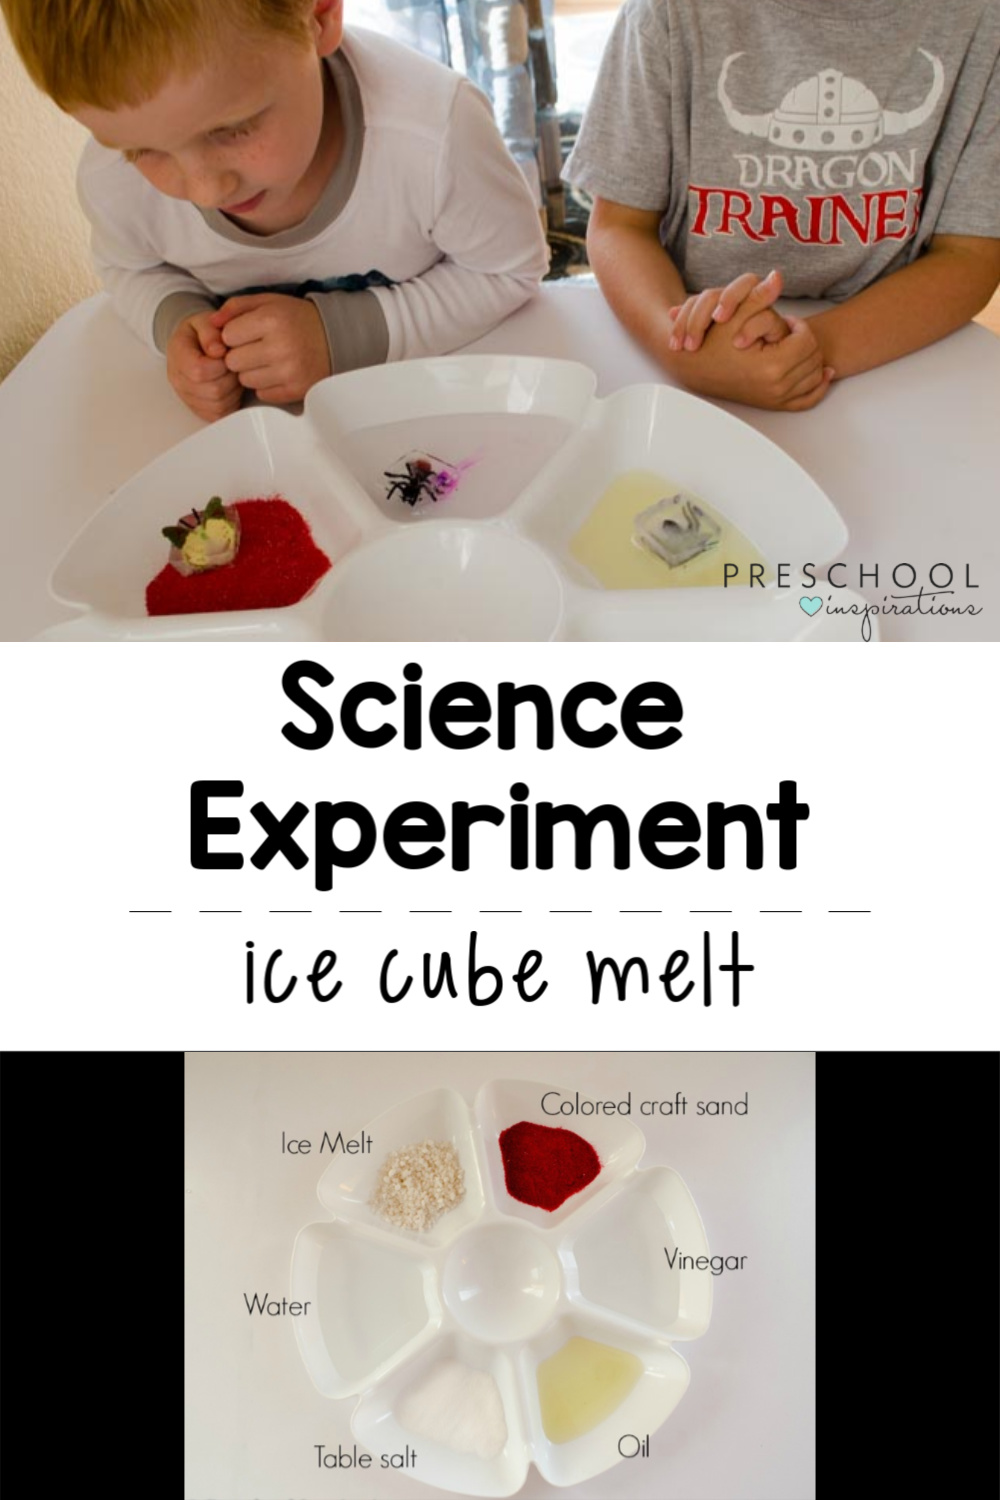 An easy science experiment for preschool - which ice cube will melt the fastest? I've found that science for kids is best when you let them lead the scientific process, and this experiment is exactly that!